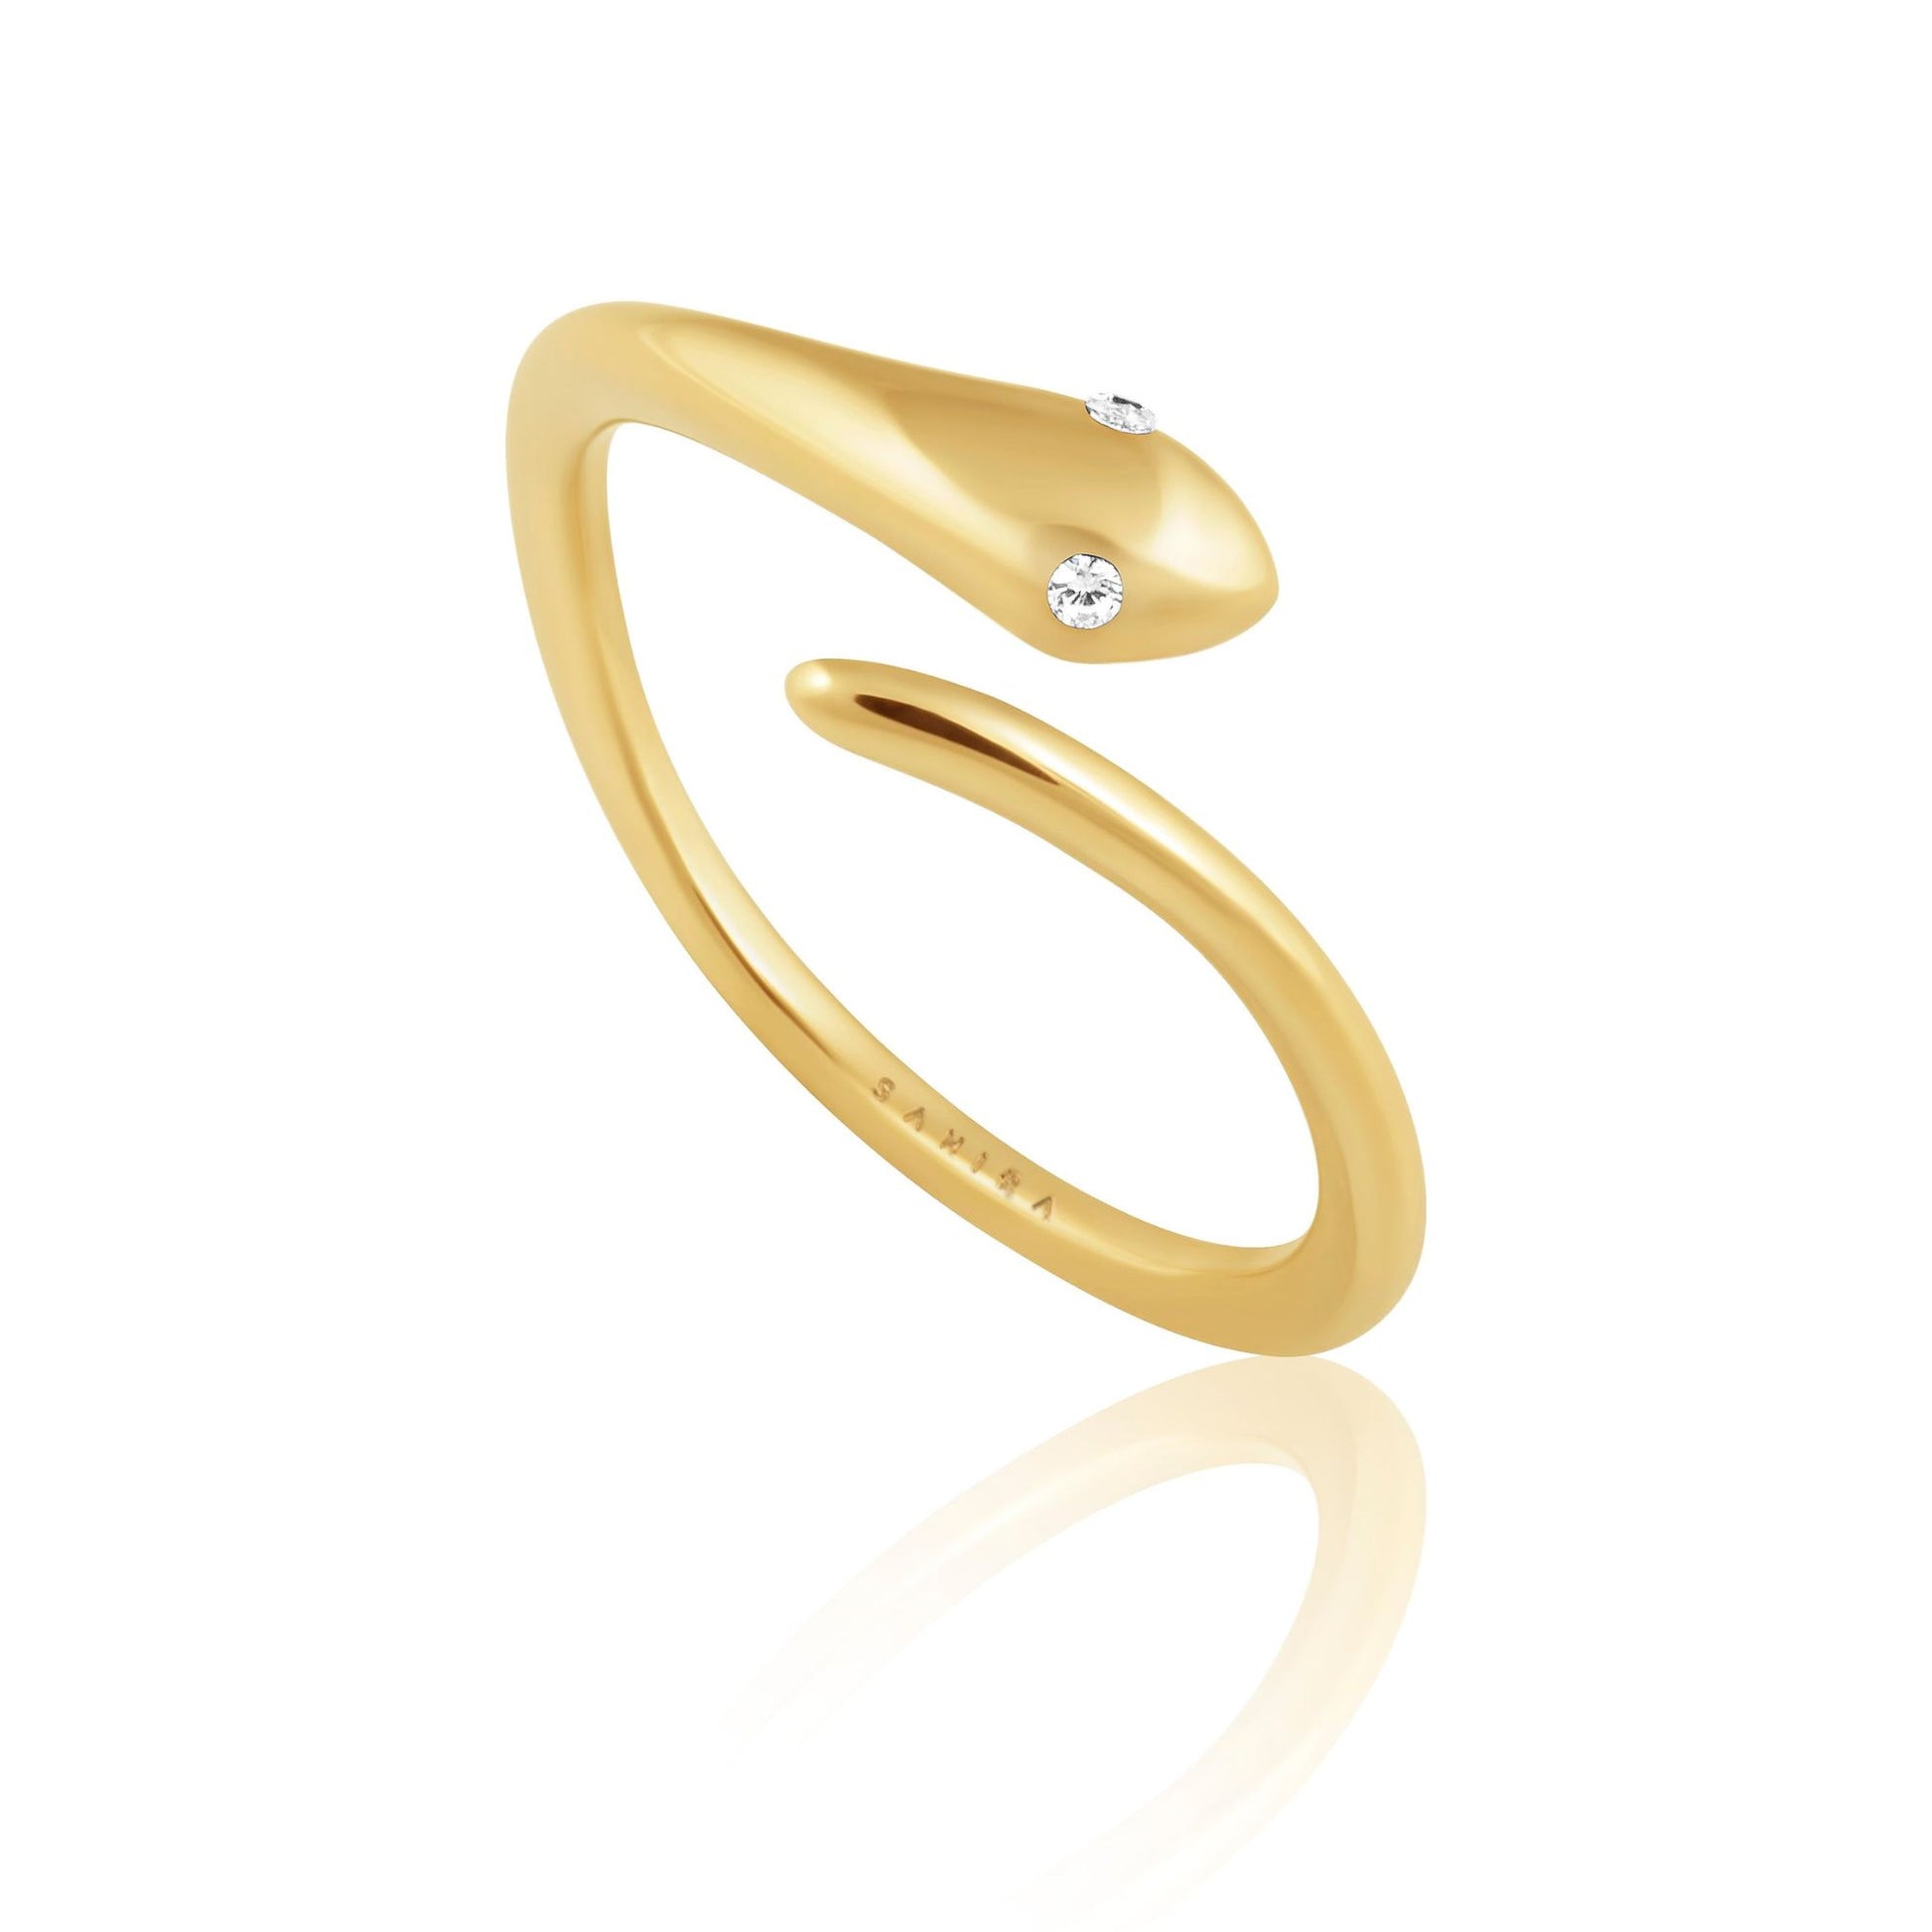 gold snake ring with cz stones 